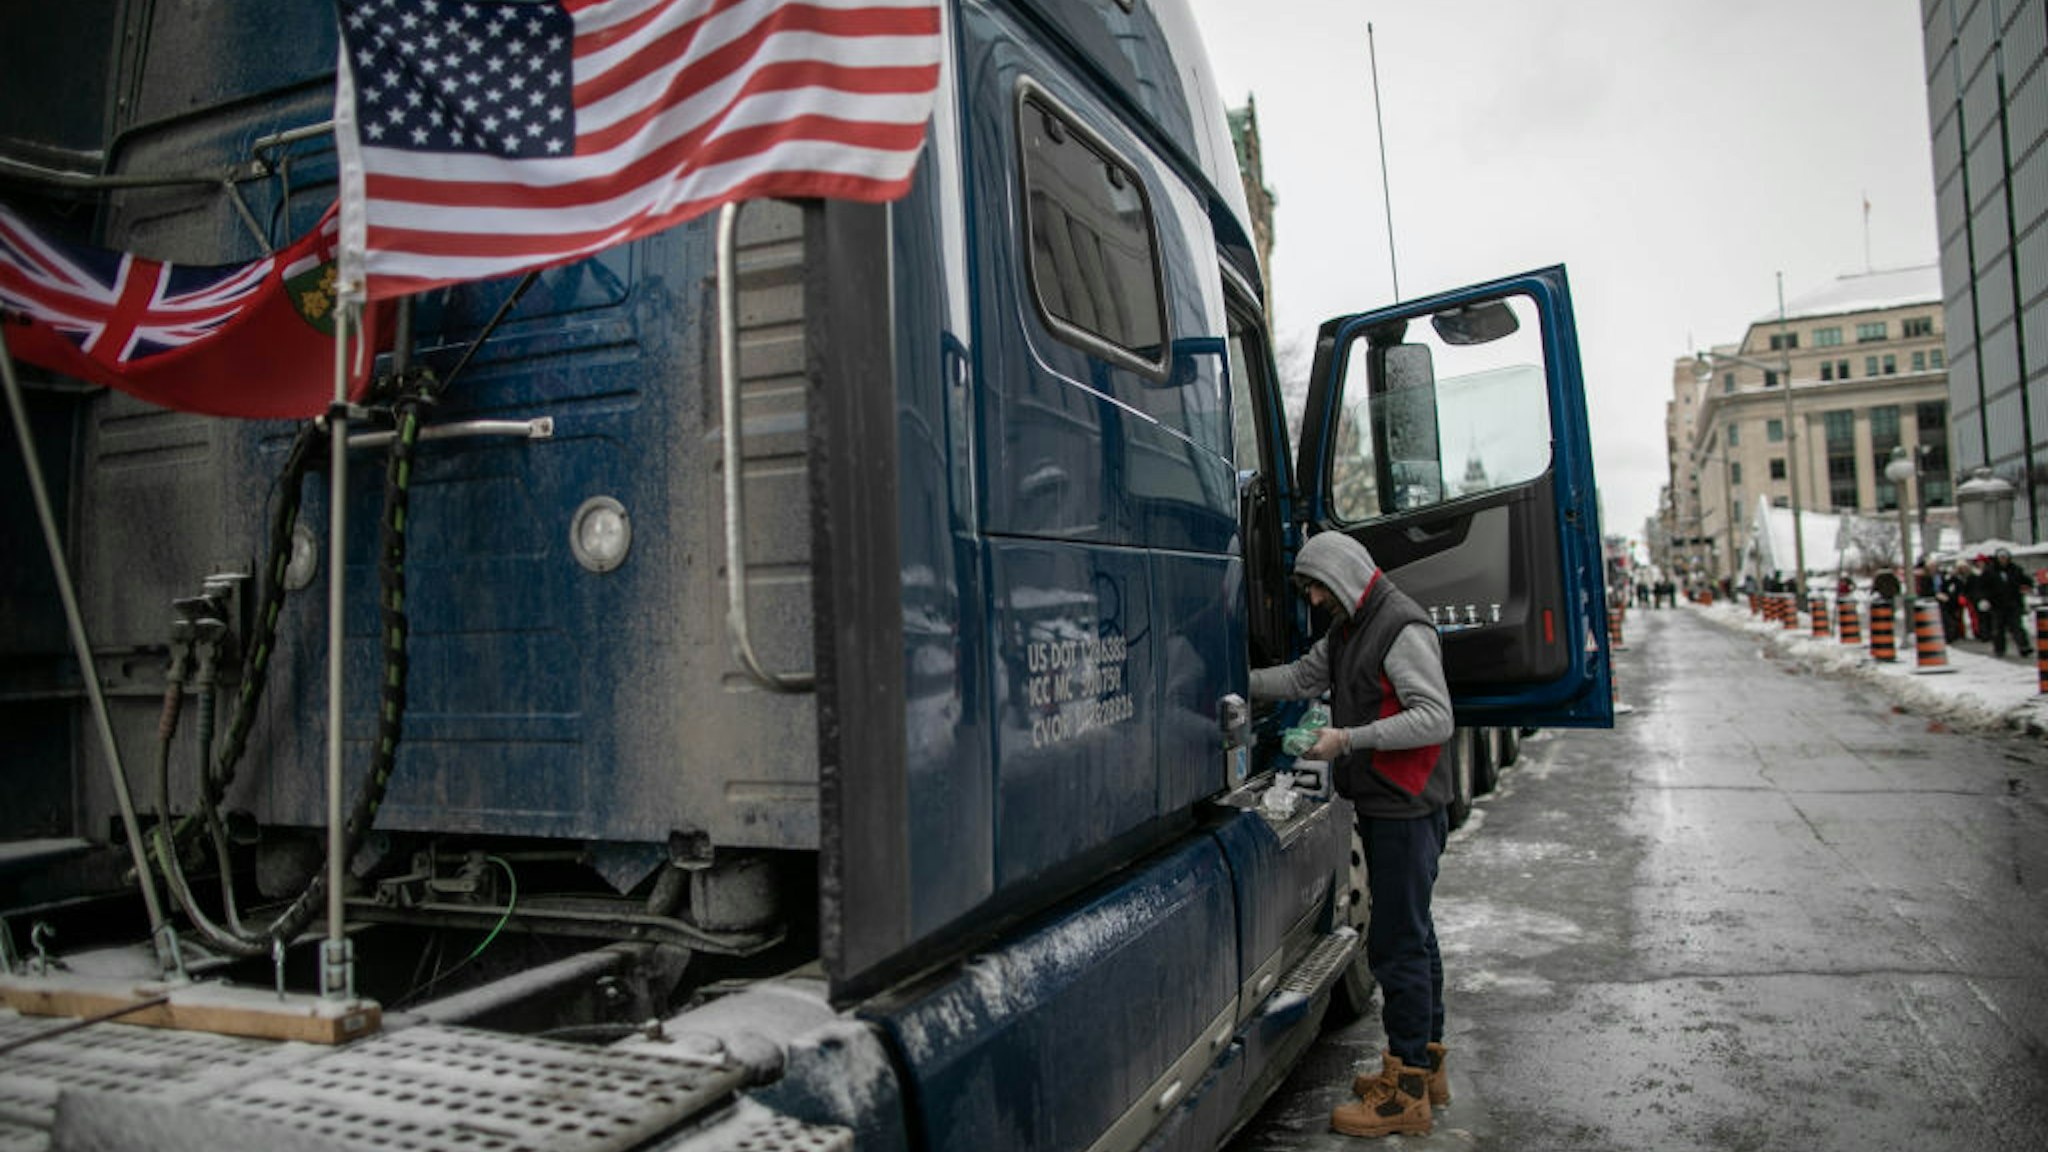 A supporters of the freedom convoy passes by parked trucks in front of the parliament hill as truckers continue their rally against coronavirus (COVID-19) measures and vaccine mandate in Ottawa, Canada on February 3, 2022.